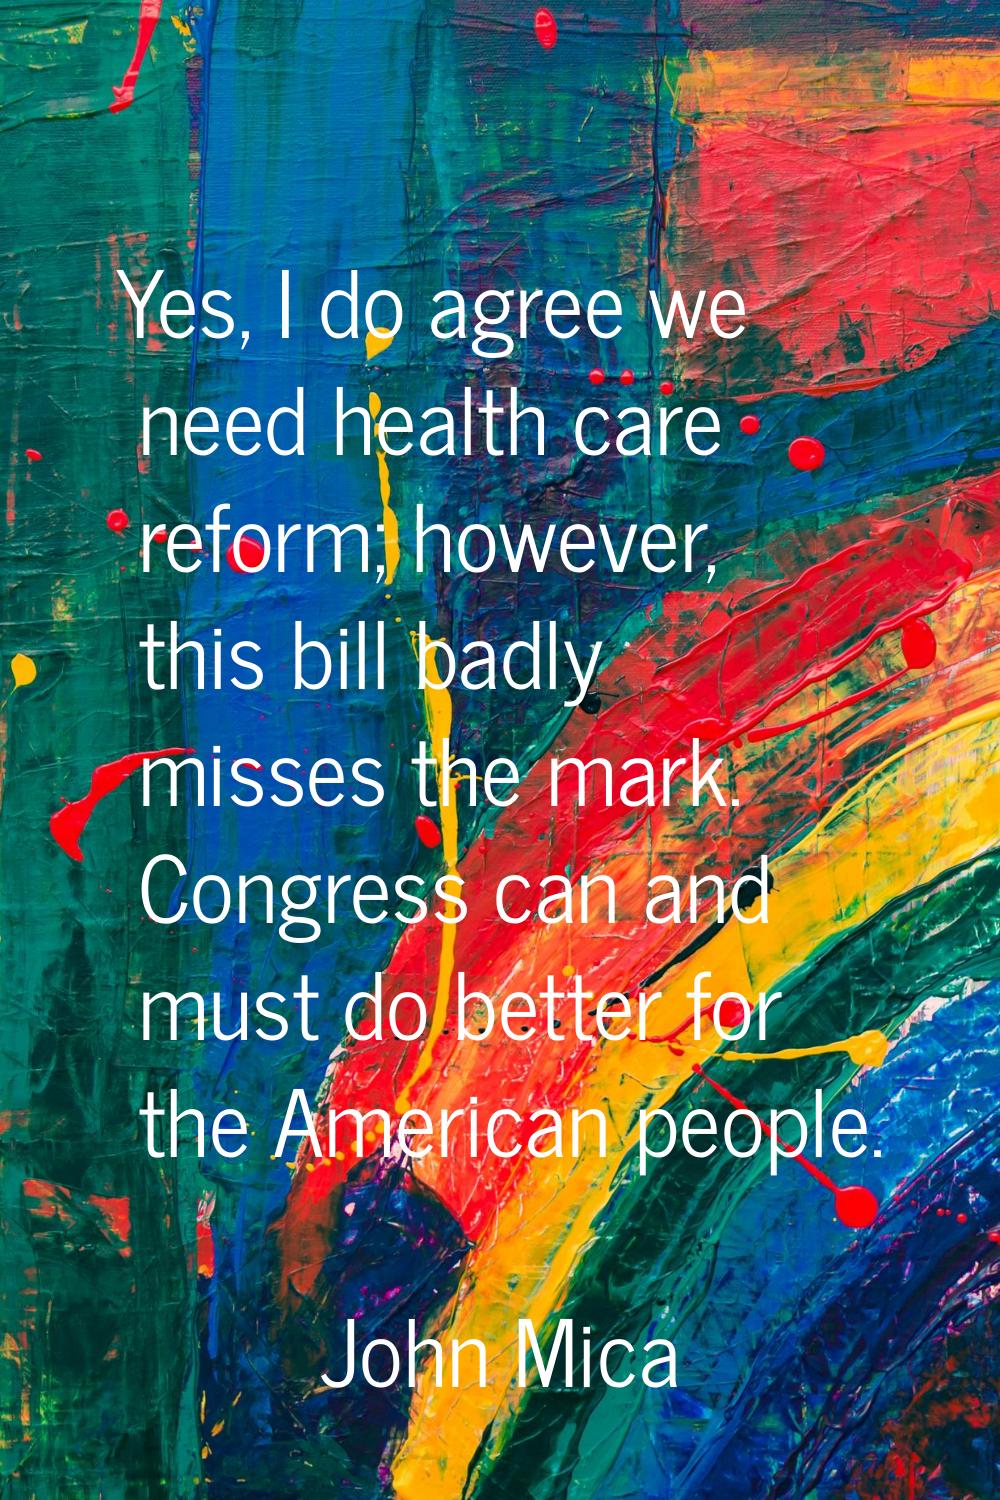 Yes, I do agree we need health care reform; however, this bill badly misses the mark. Congress can 